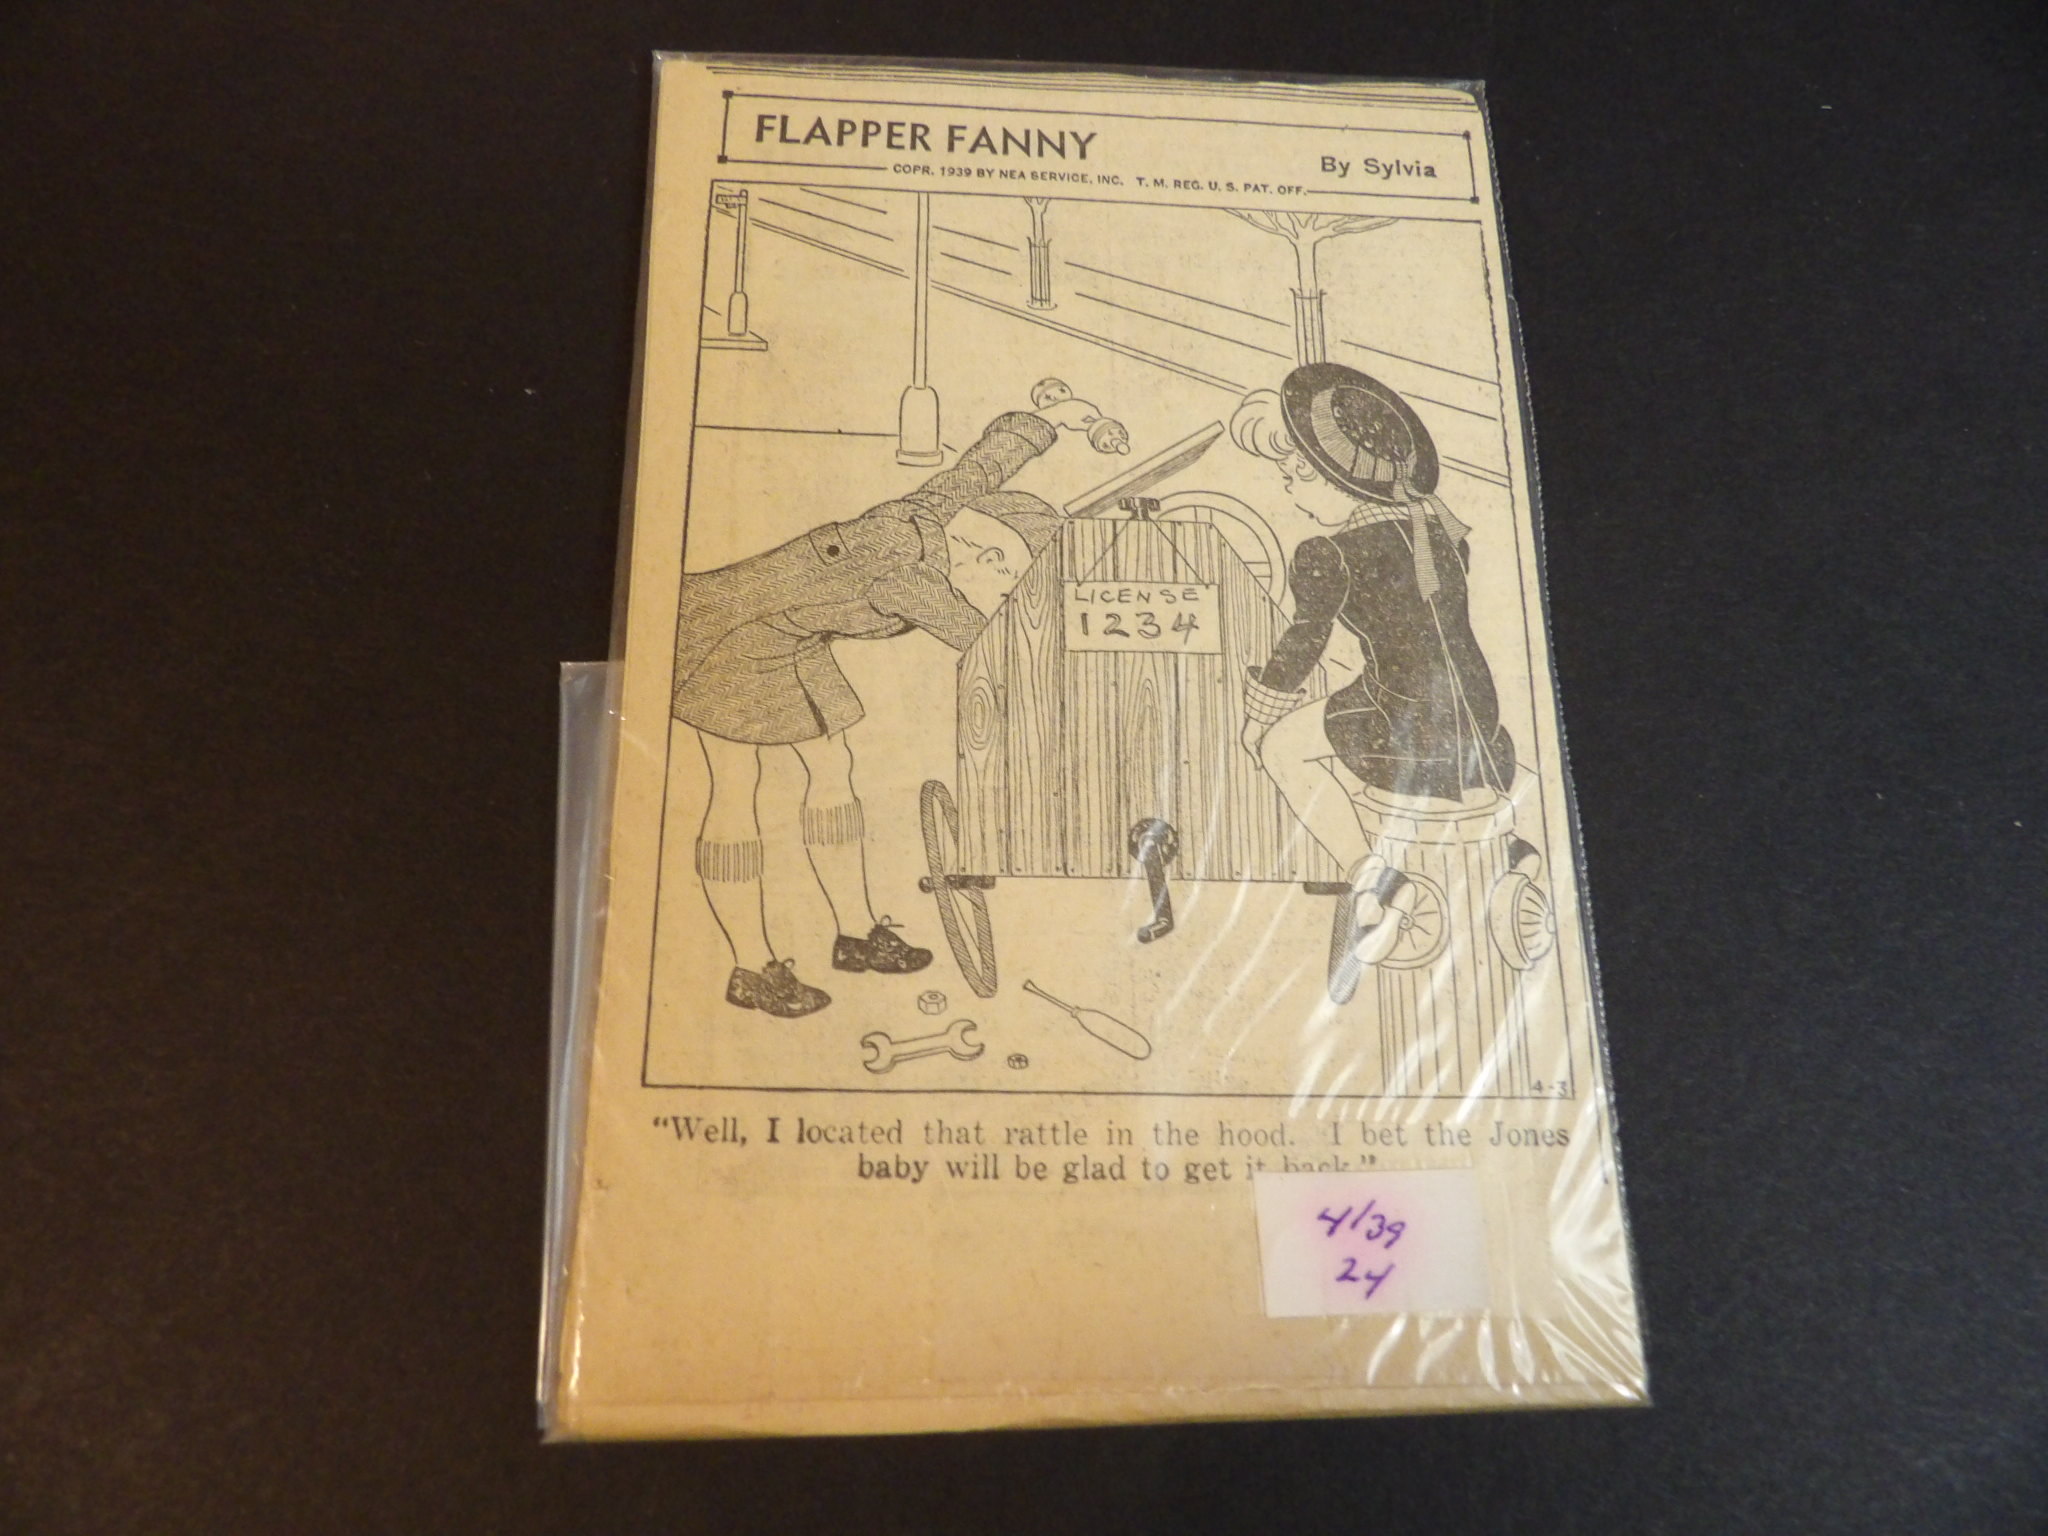 The Forgotten Flapper by Laini Giles